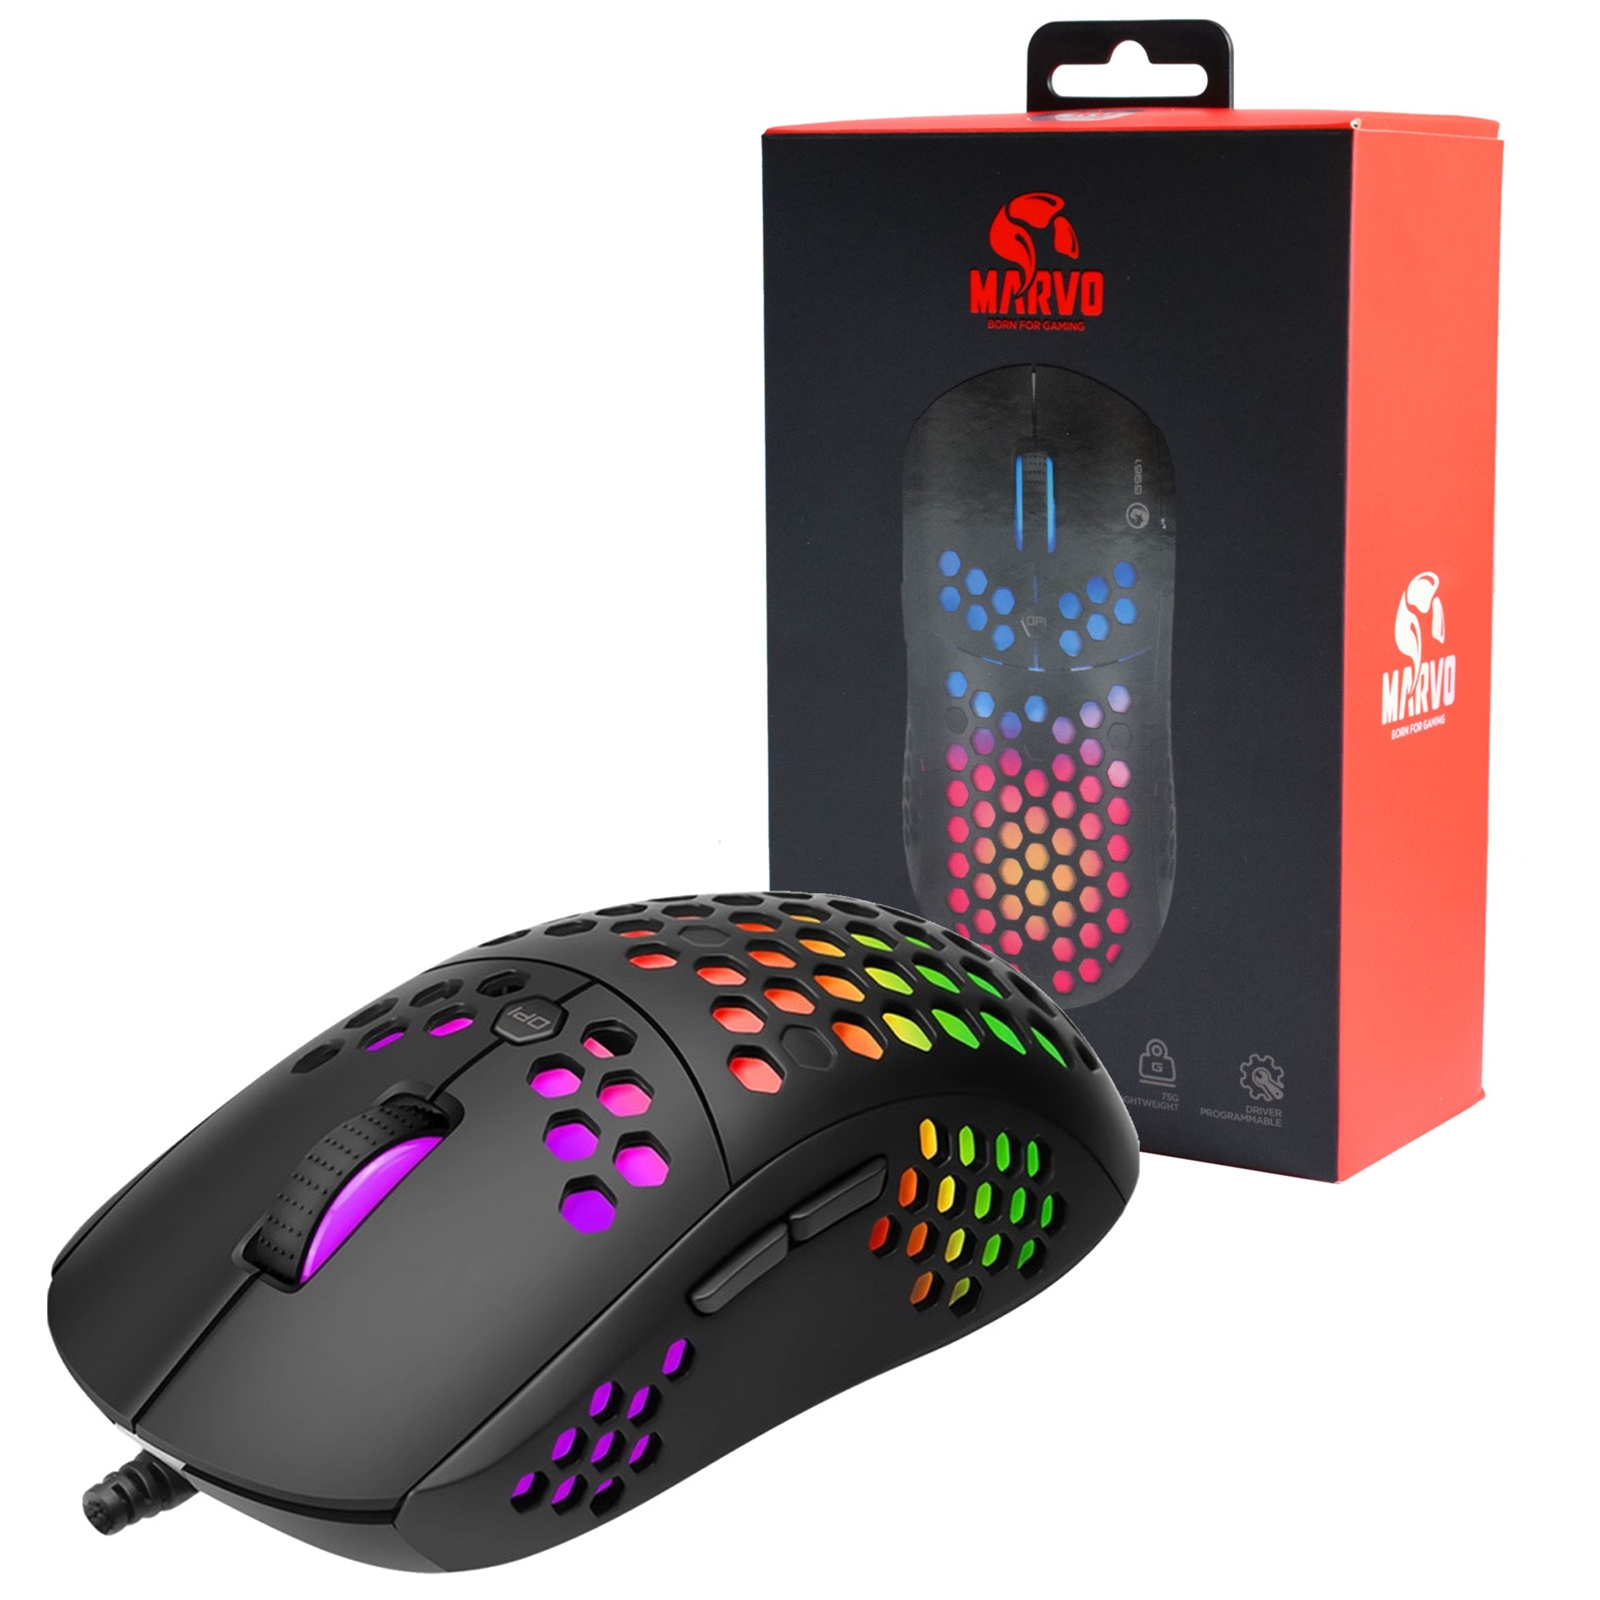 Marvo Scorpion G961 RGB Gaming Mouse, USB, Unique Honeycomb Design Weighing in at Just 75g, Adjustable up to 12000 DPI, Pixart 3327 Gaming Grade Optical Sensor with 6 Programmable Buttons